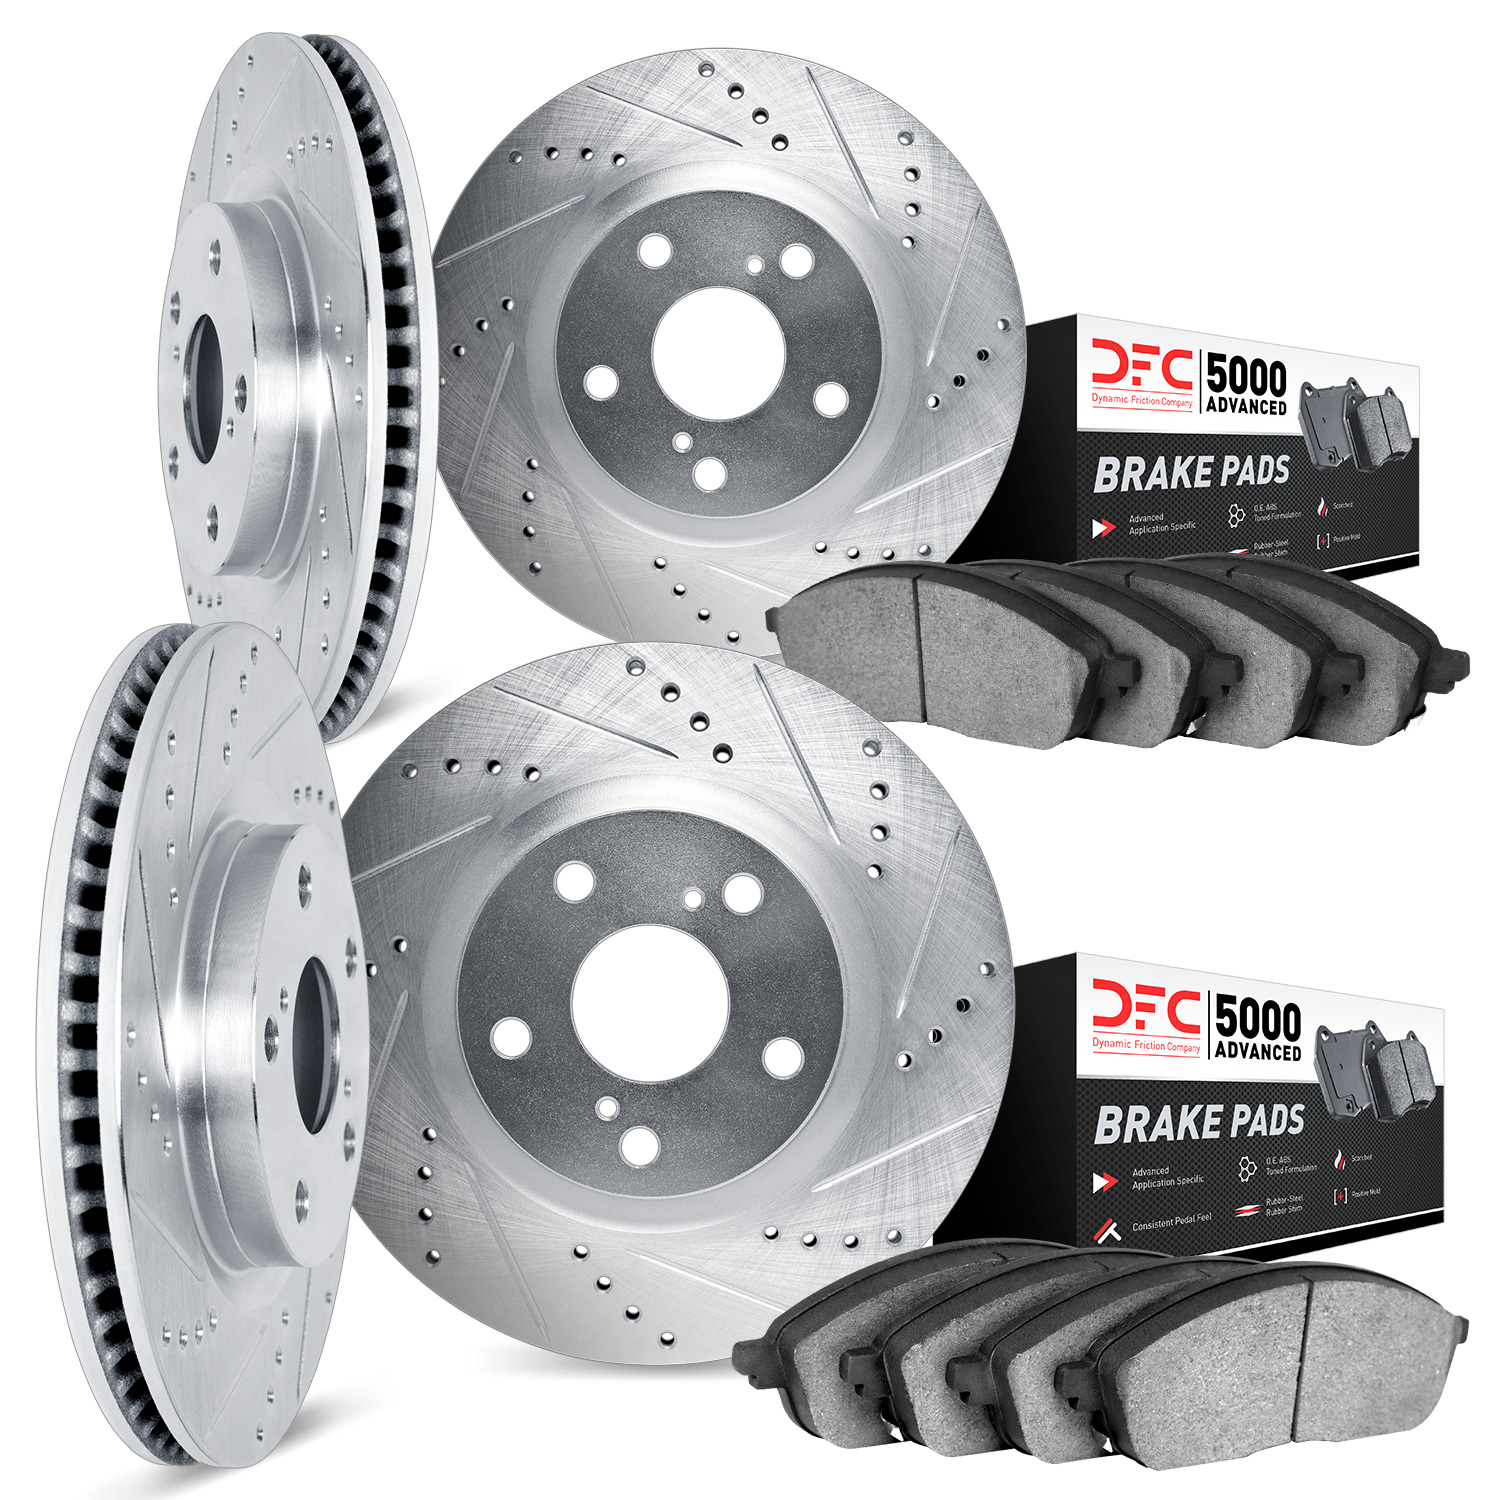 7504-45032 Drilled/Slotted Brake Rotors w/5000 Advanced Brake Pads Kit [Silver], 2010-2017 GM, Position: Front and Rear